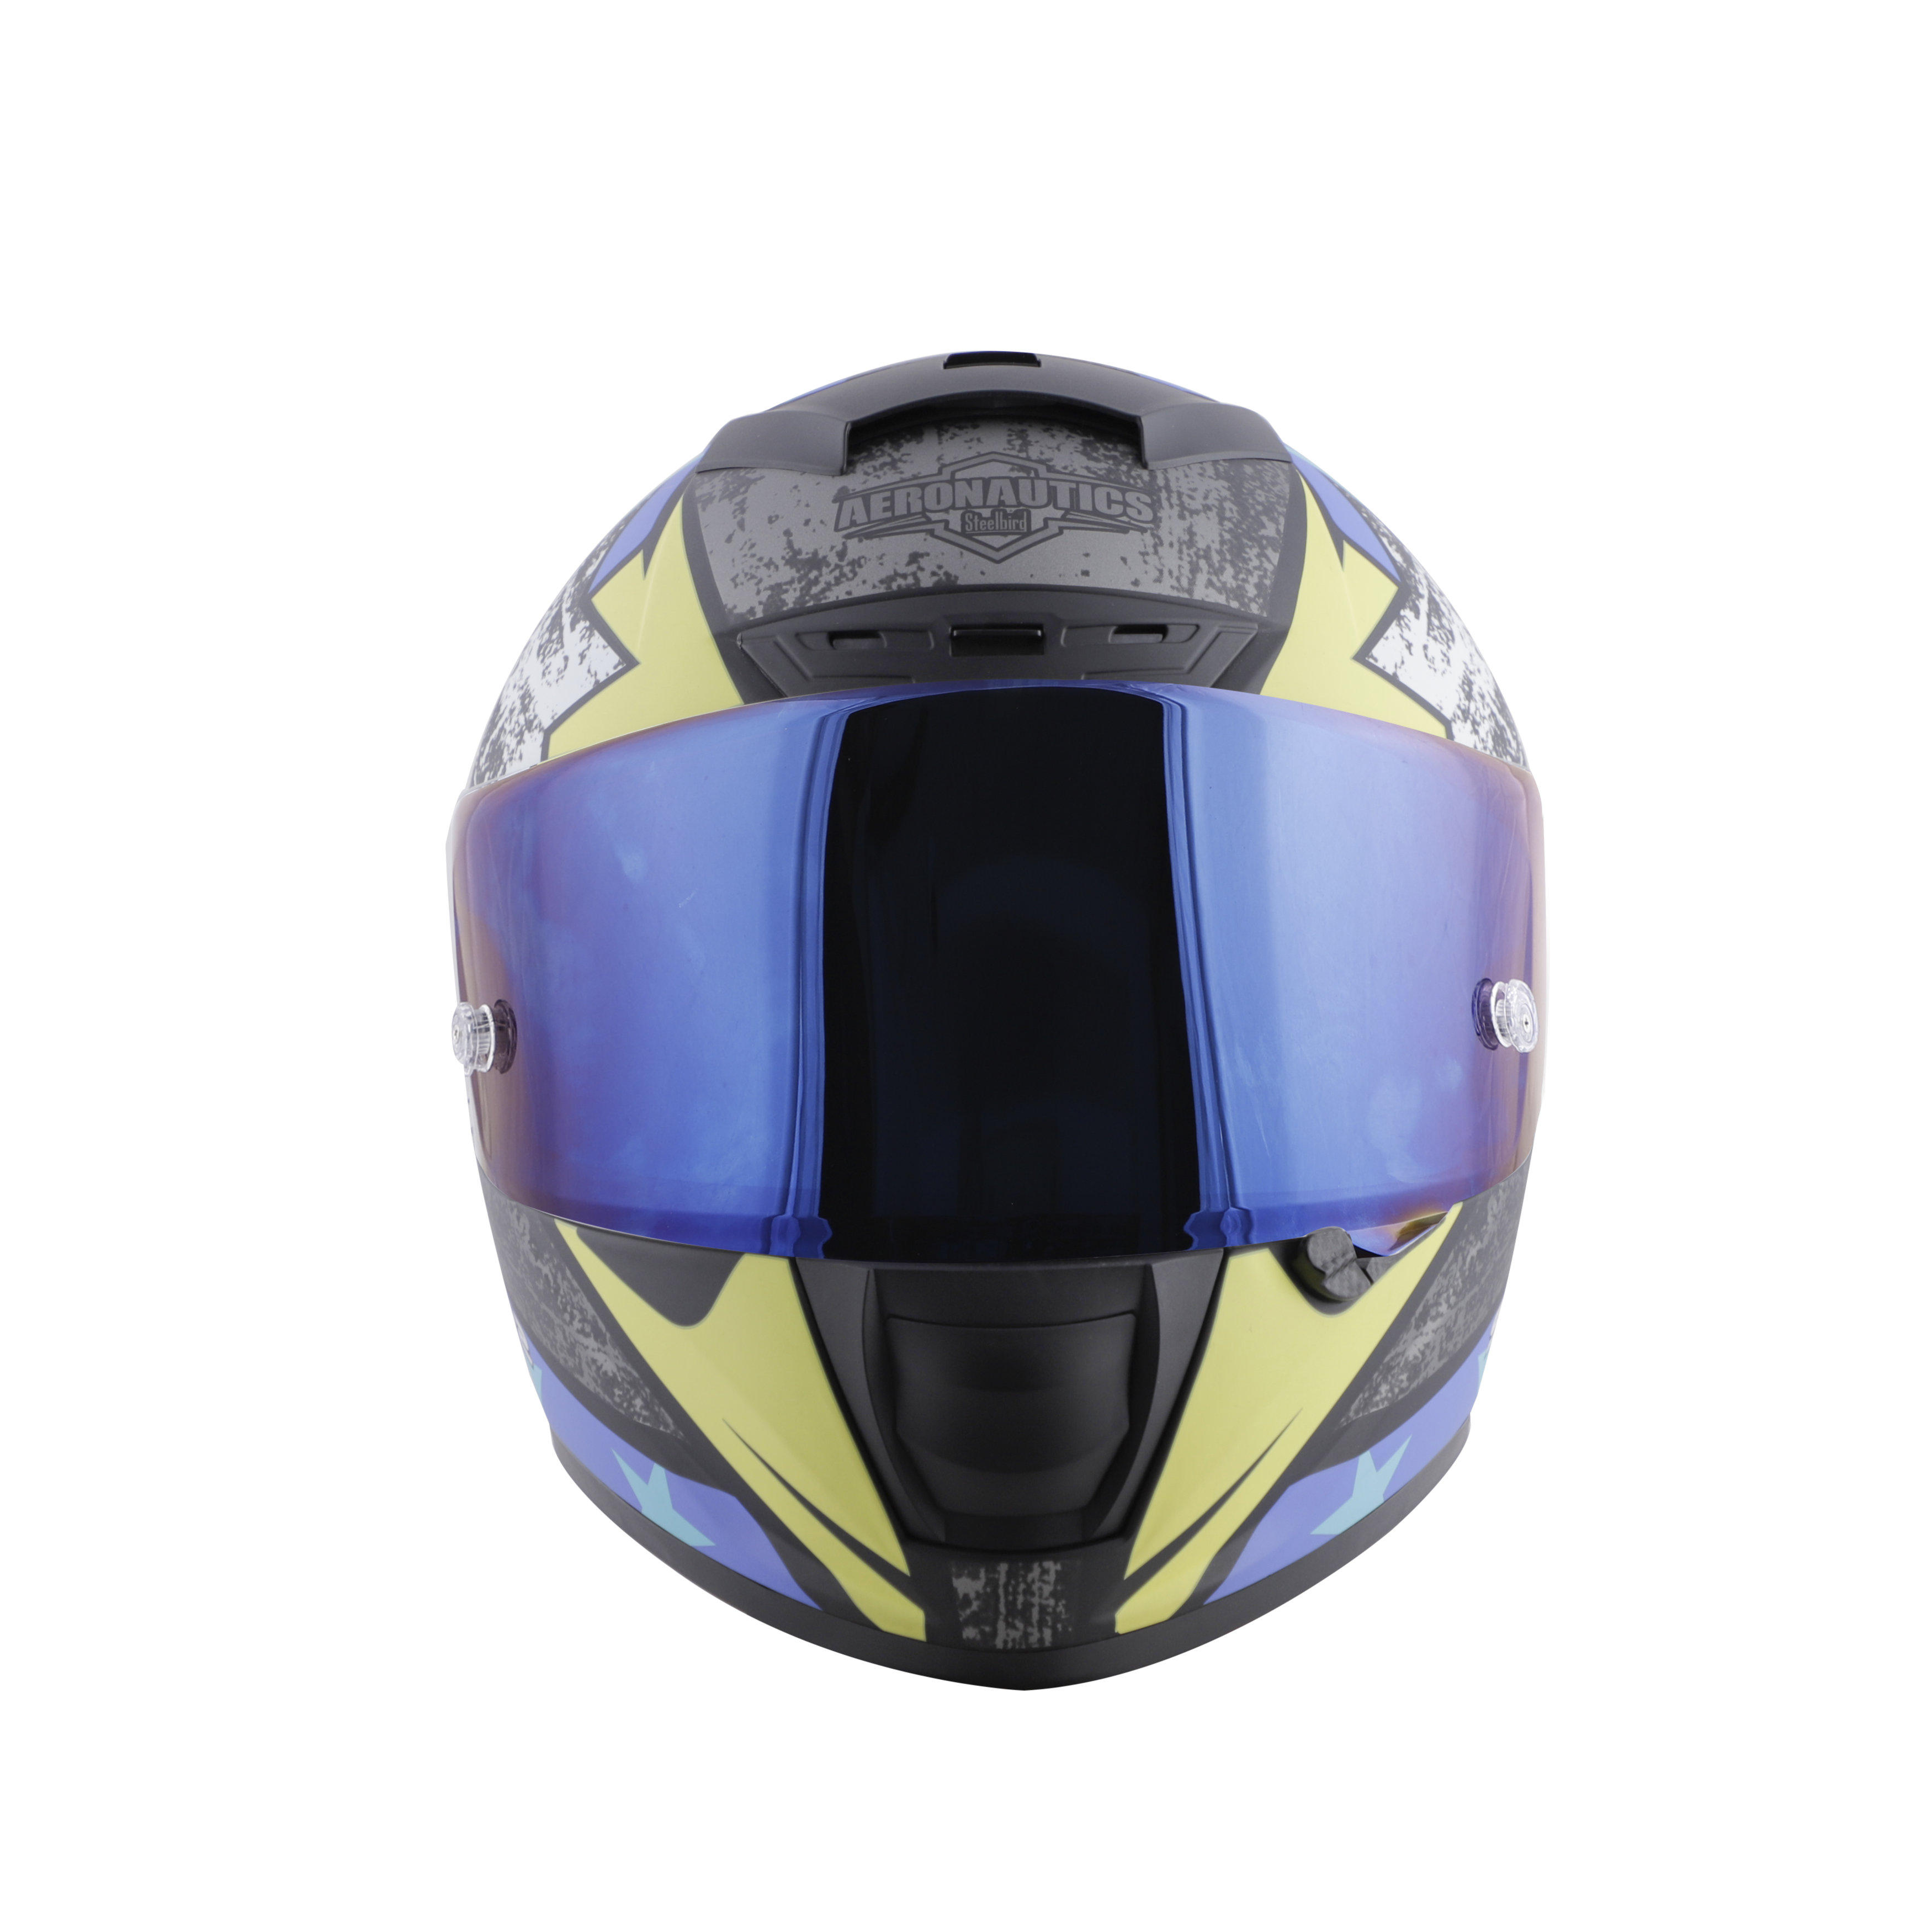 SA-2 STAR GLOSSY BLACK WITH GREY FITTED WITH CLEAR VISOR CHROME BLUE VISOR FREE (WITH ANTI-FOG SHIELD HOLDER)